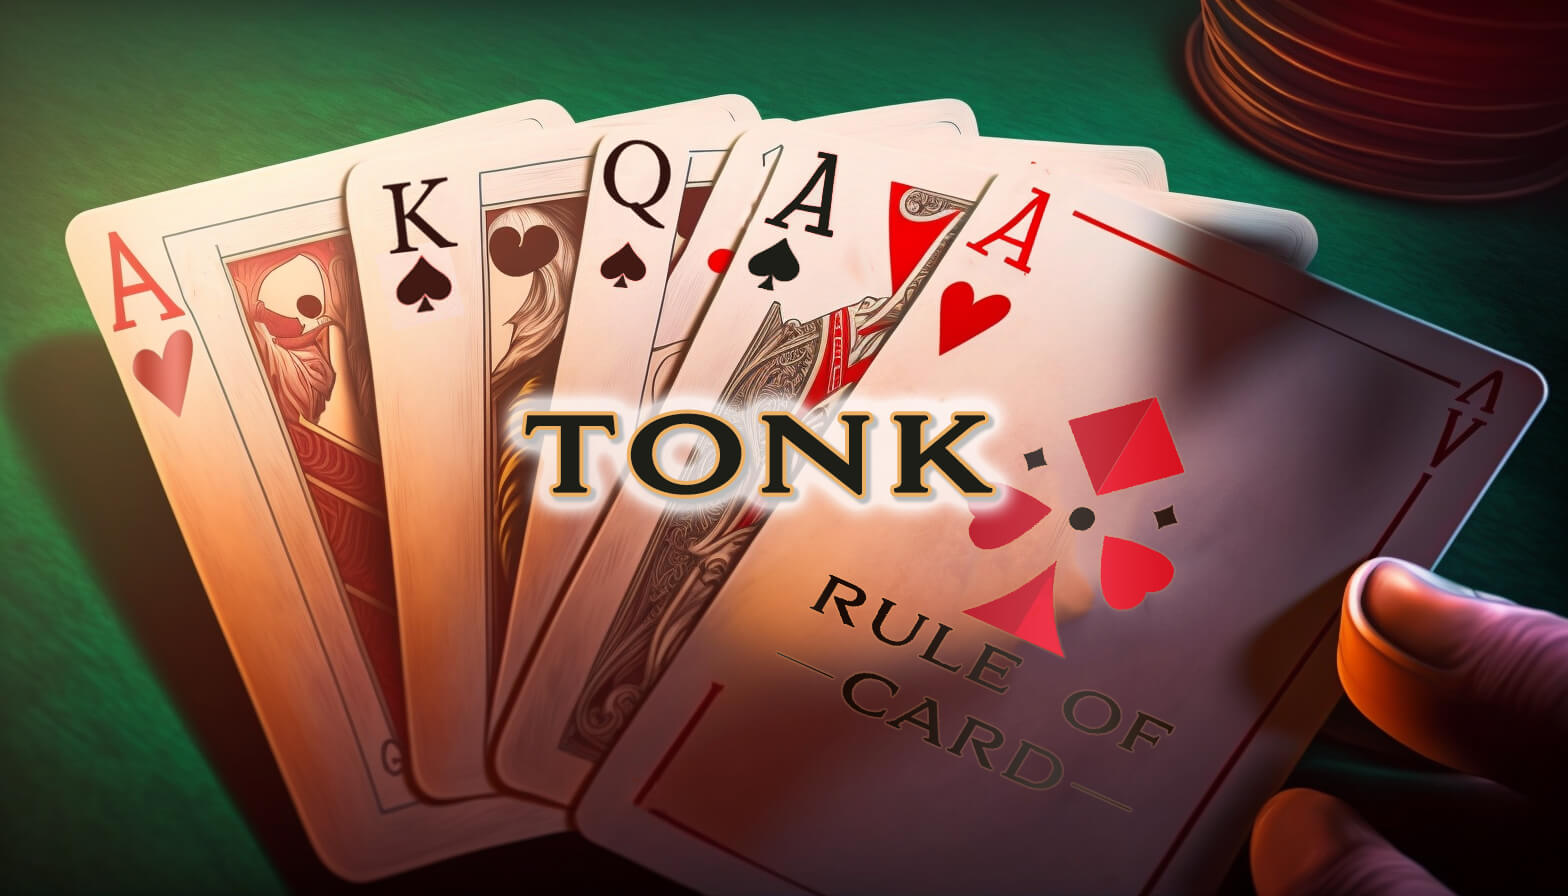 Playing the card game Tonk